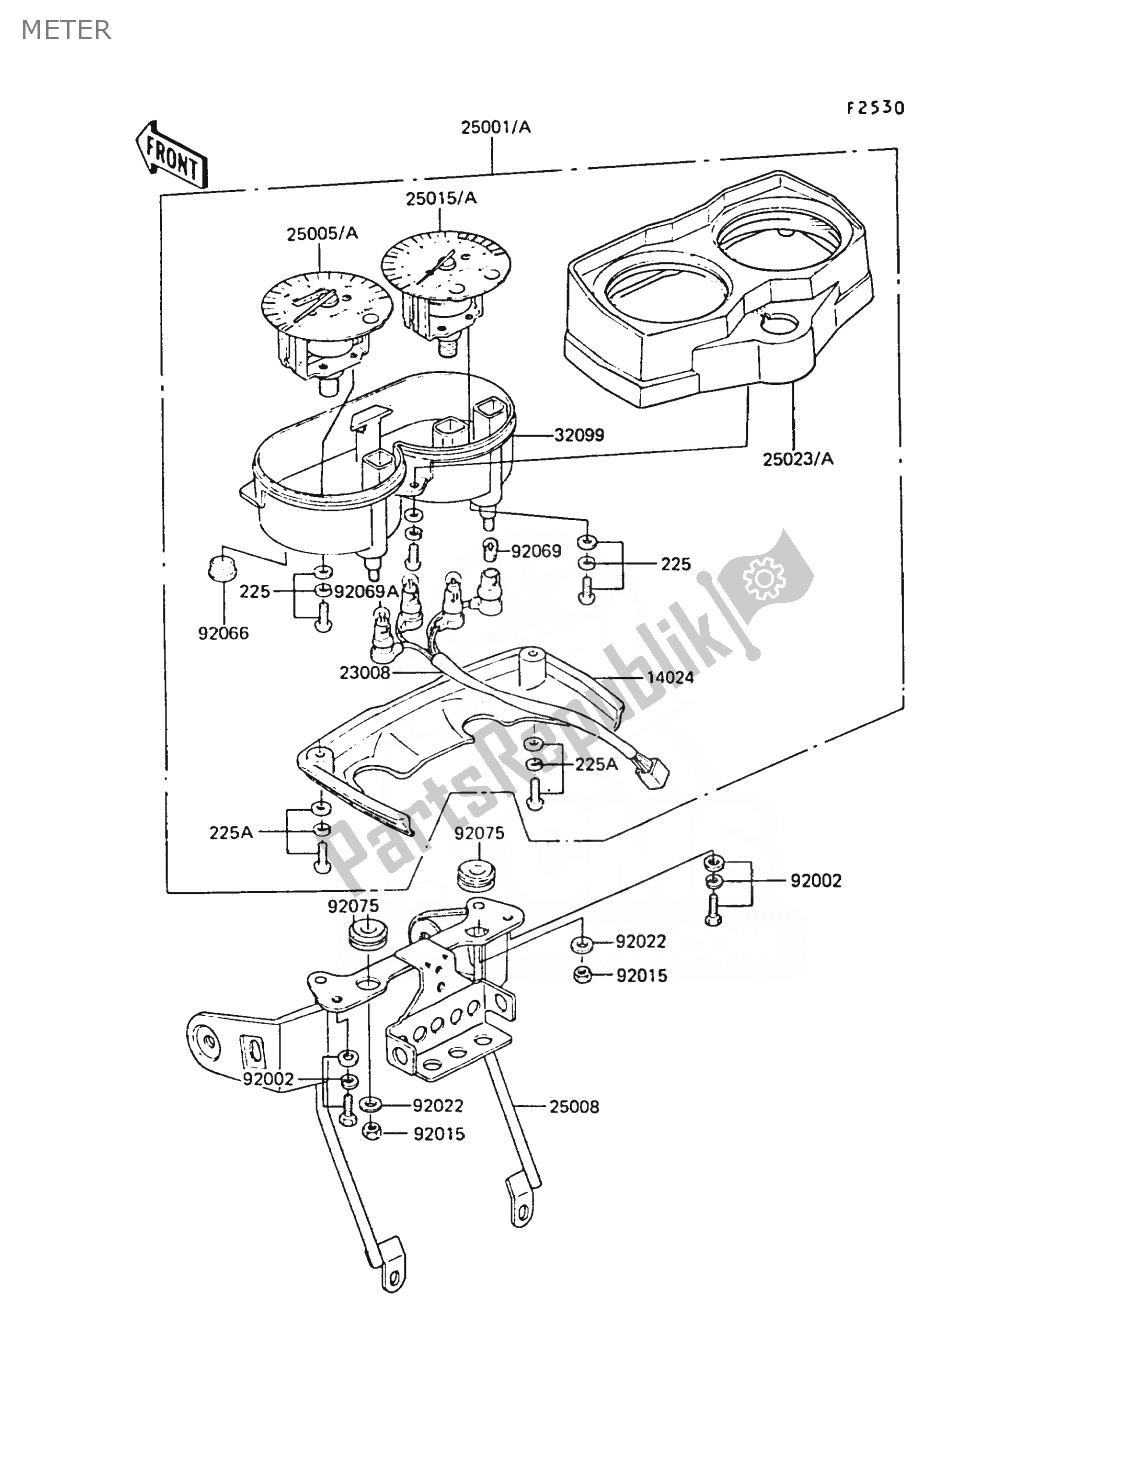 All parts for the Meter of the Kawasaki AR 50 1989